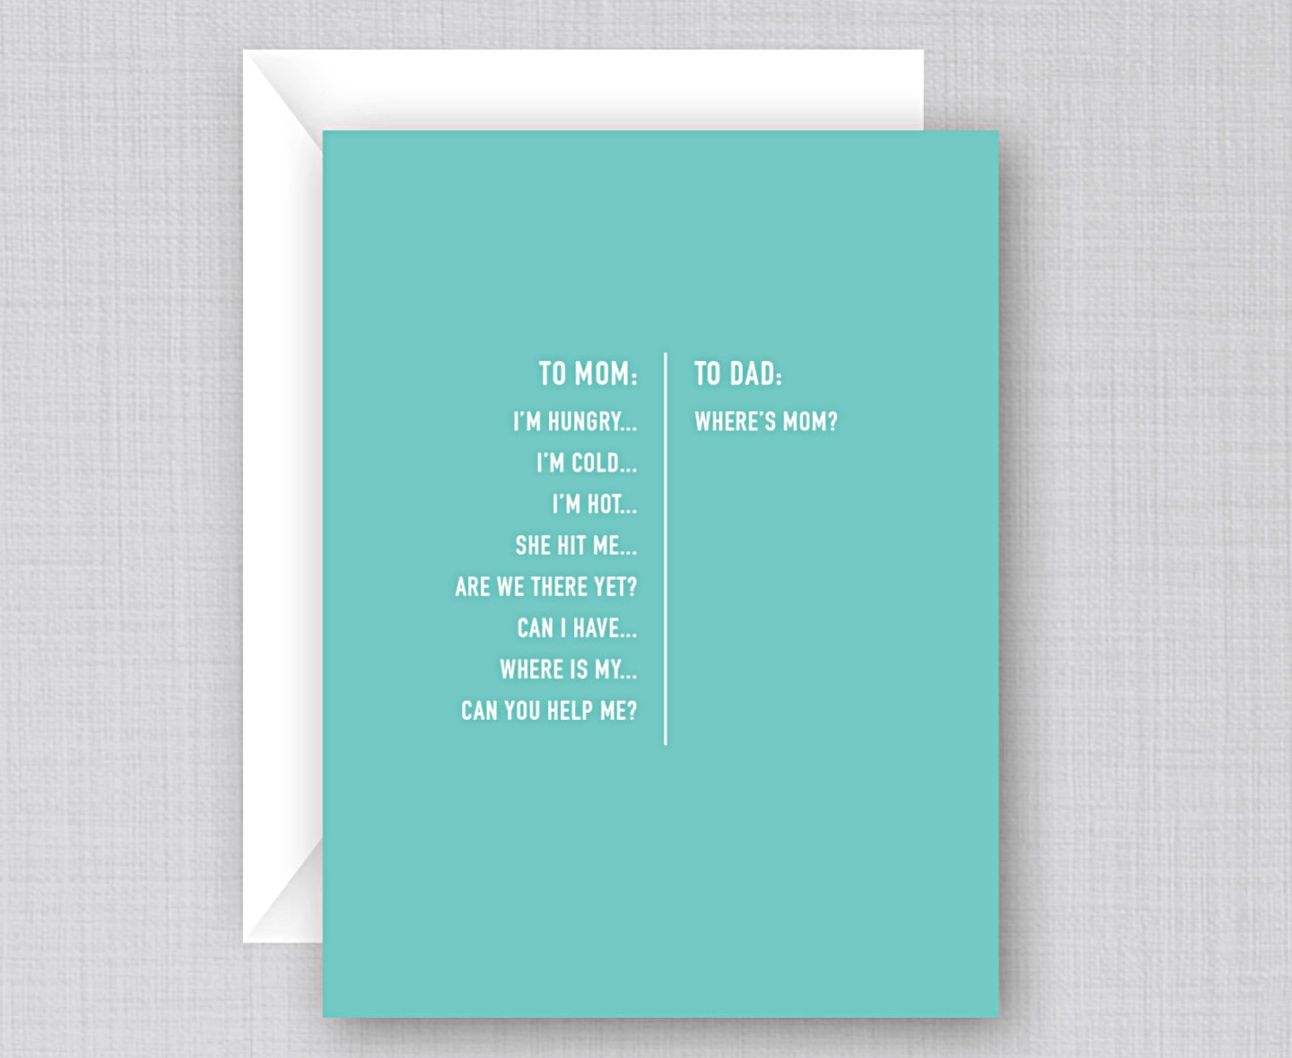 Funniest Mother's Day cards: To Mom/To Dad card from Classy Cards Creative